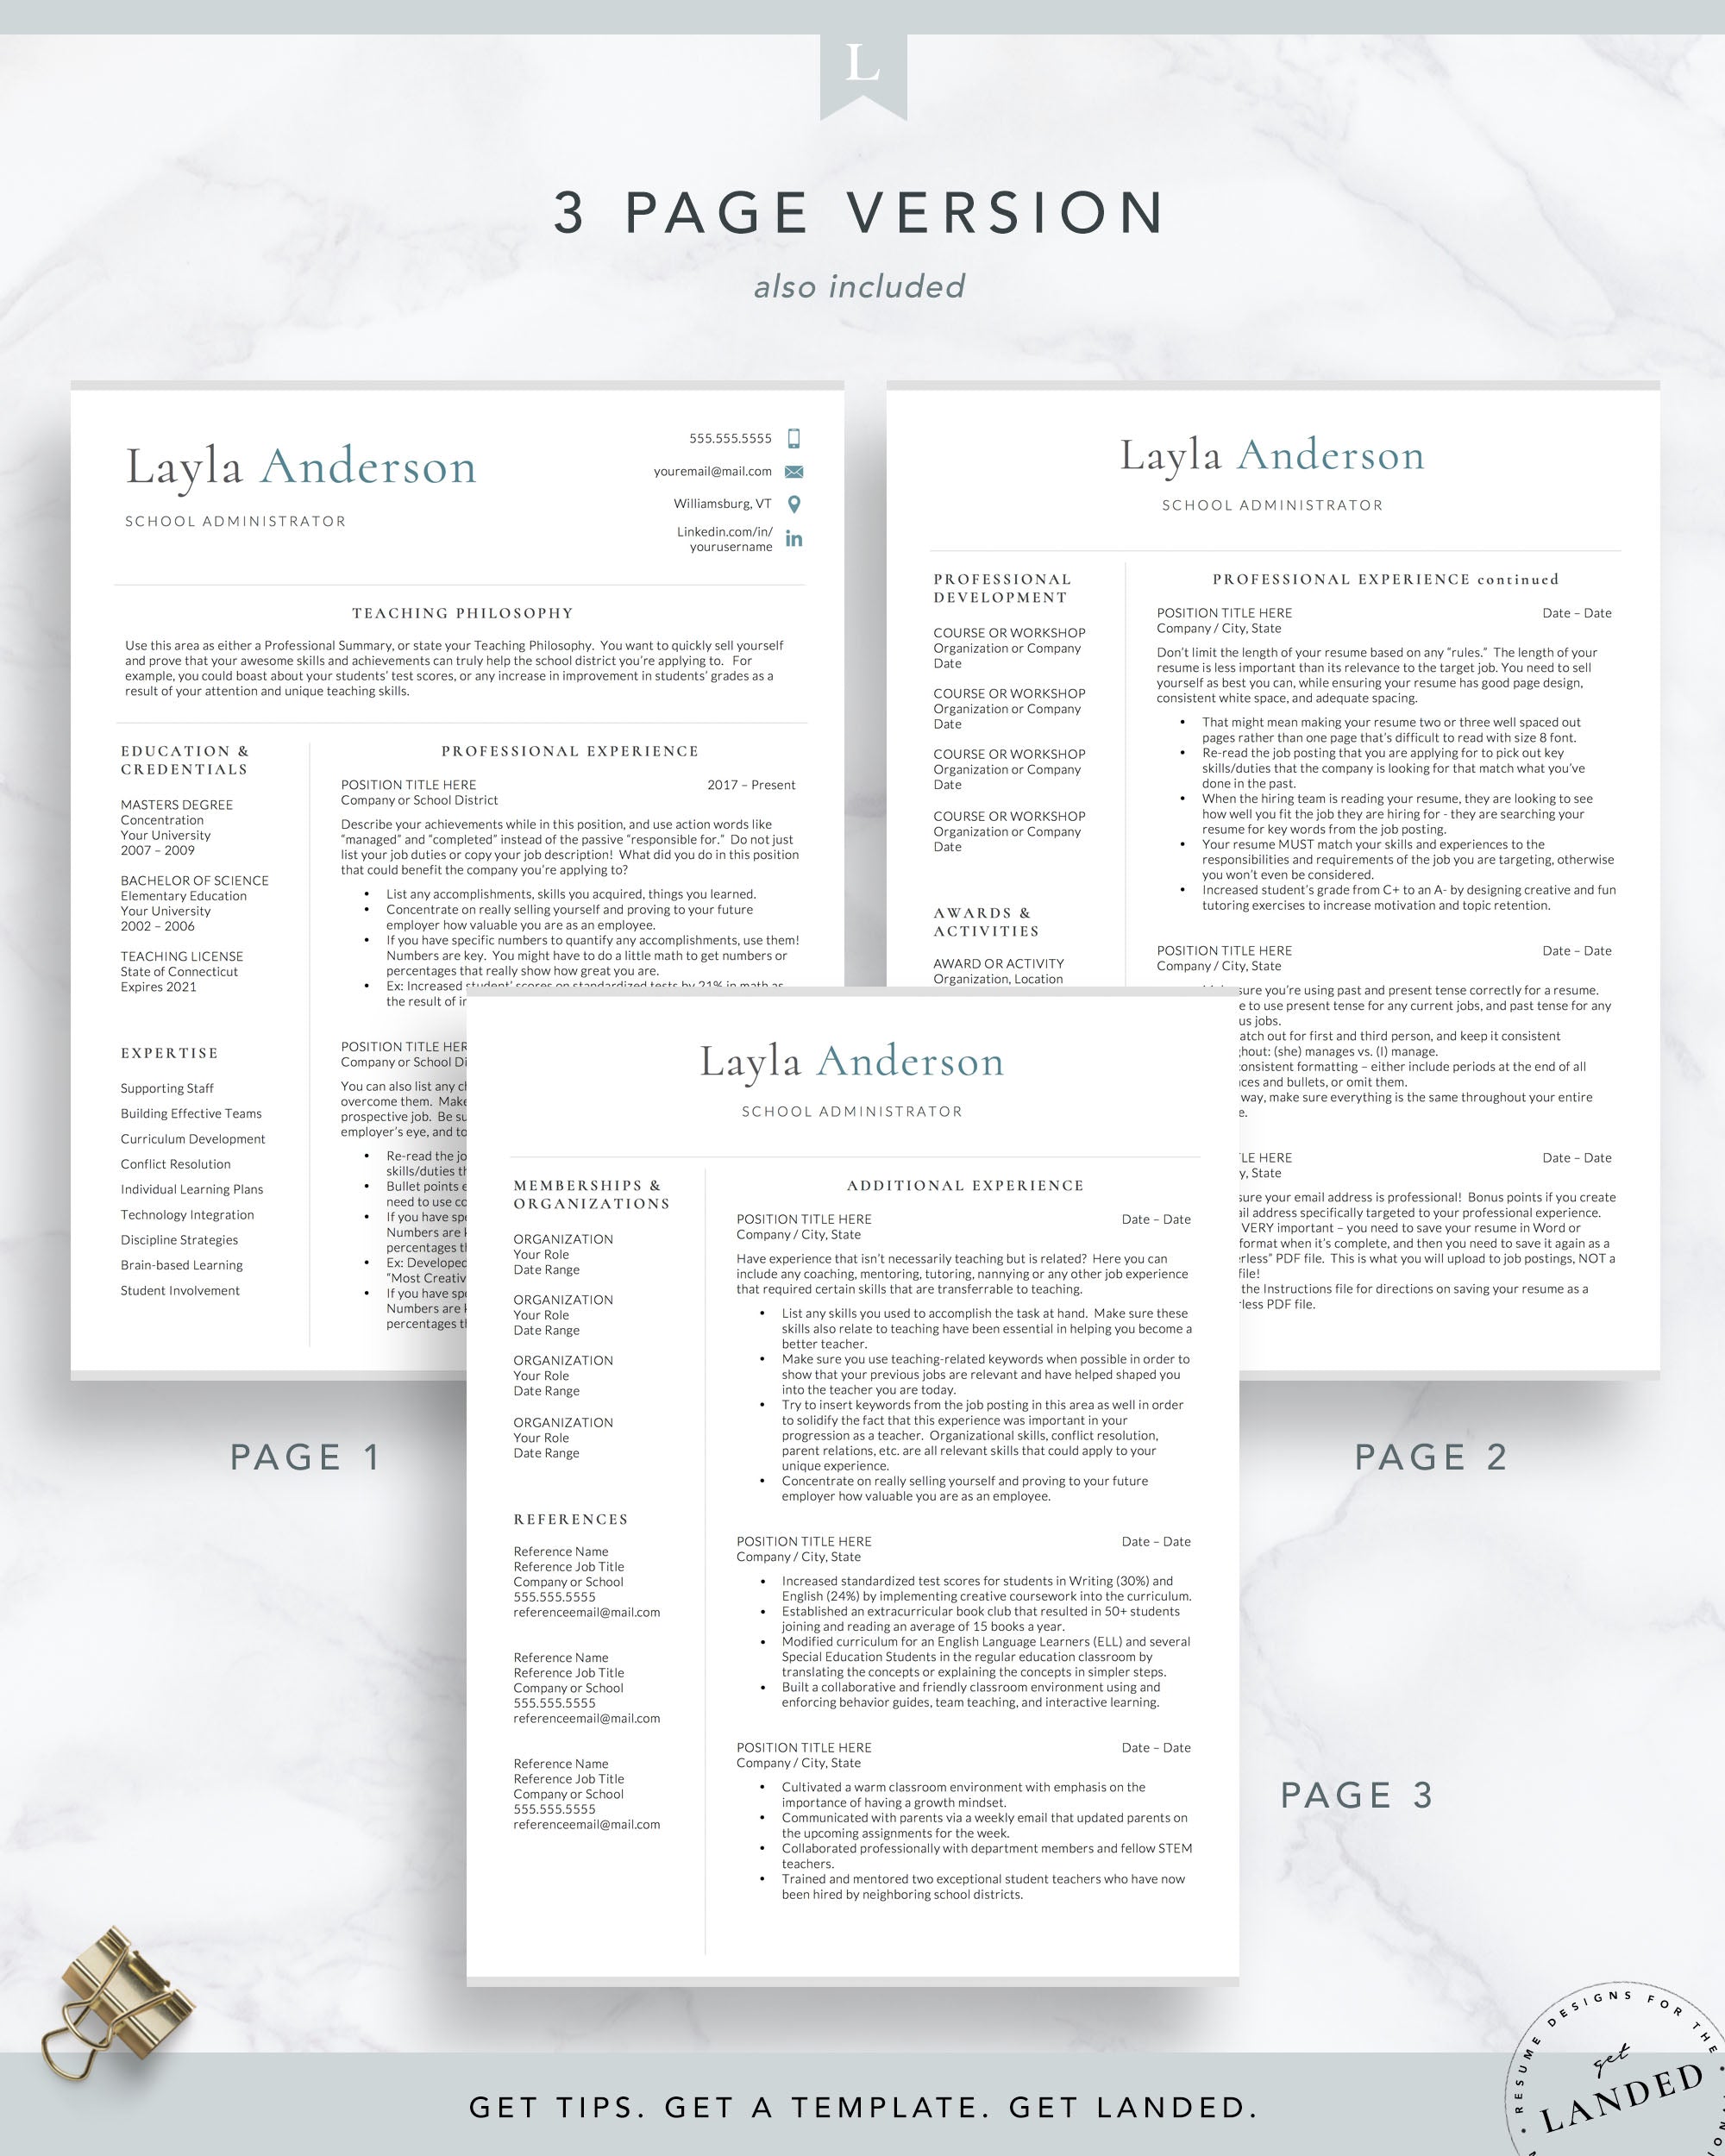 Teacher Resume Template, School Administration Resume Template | The Layla